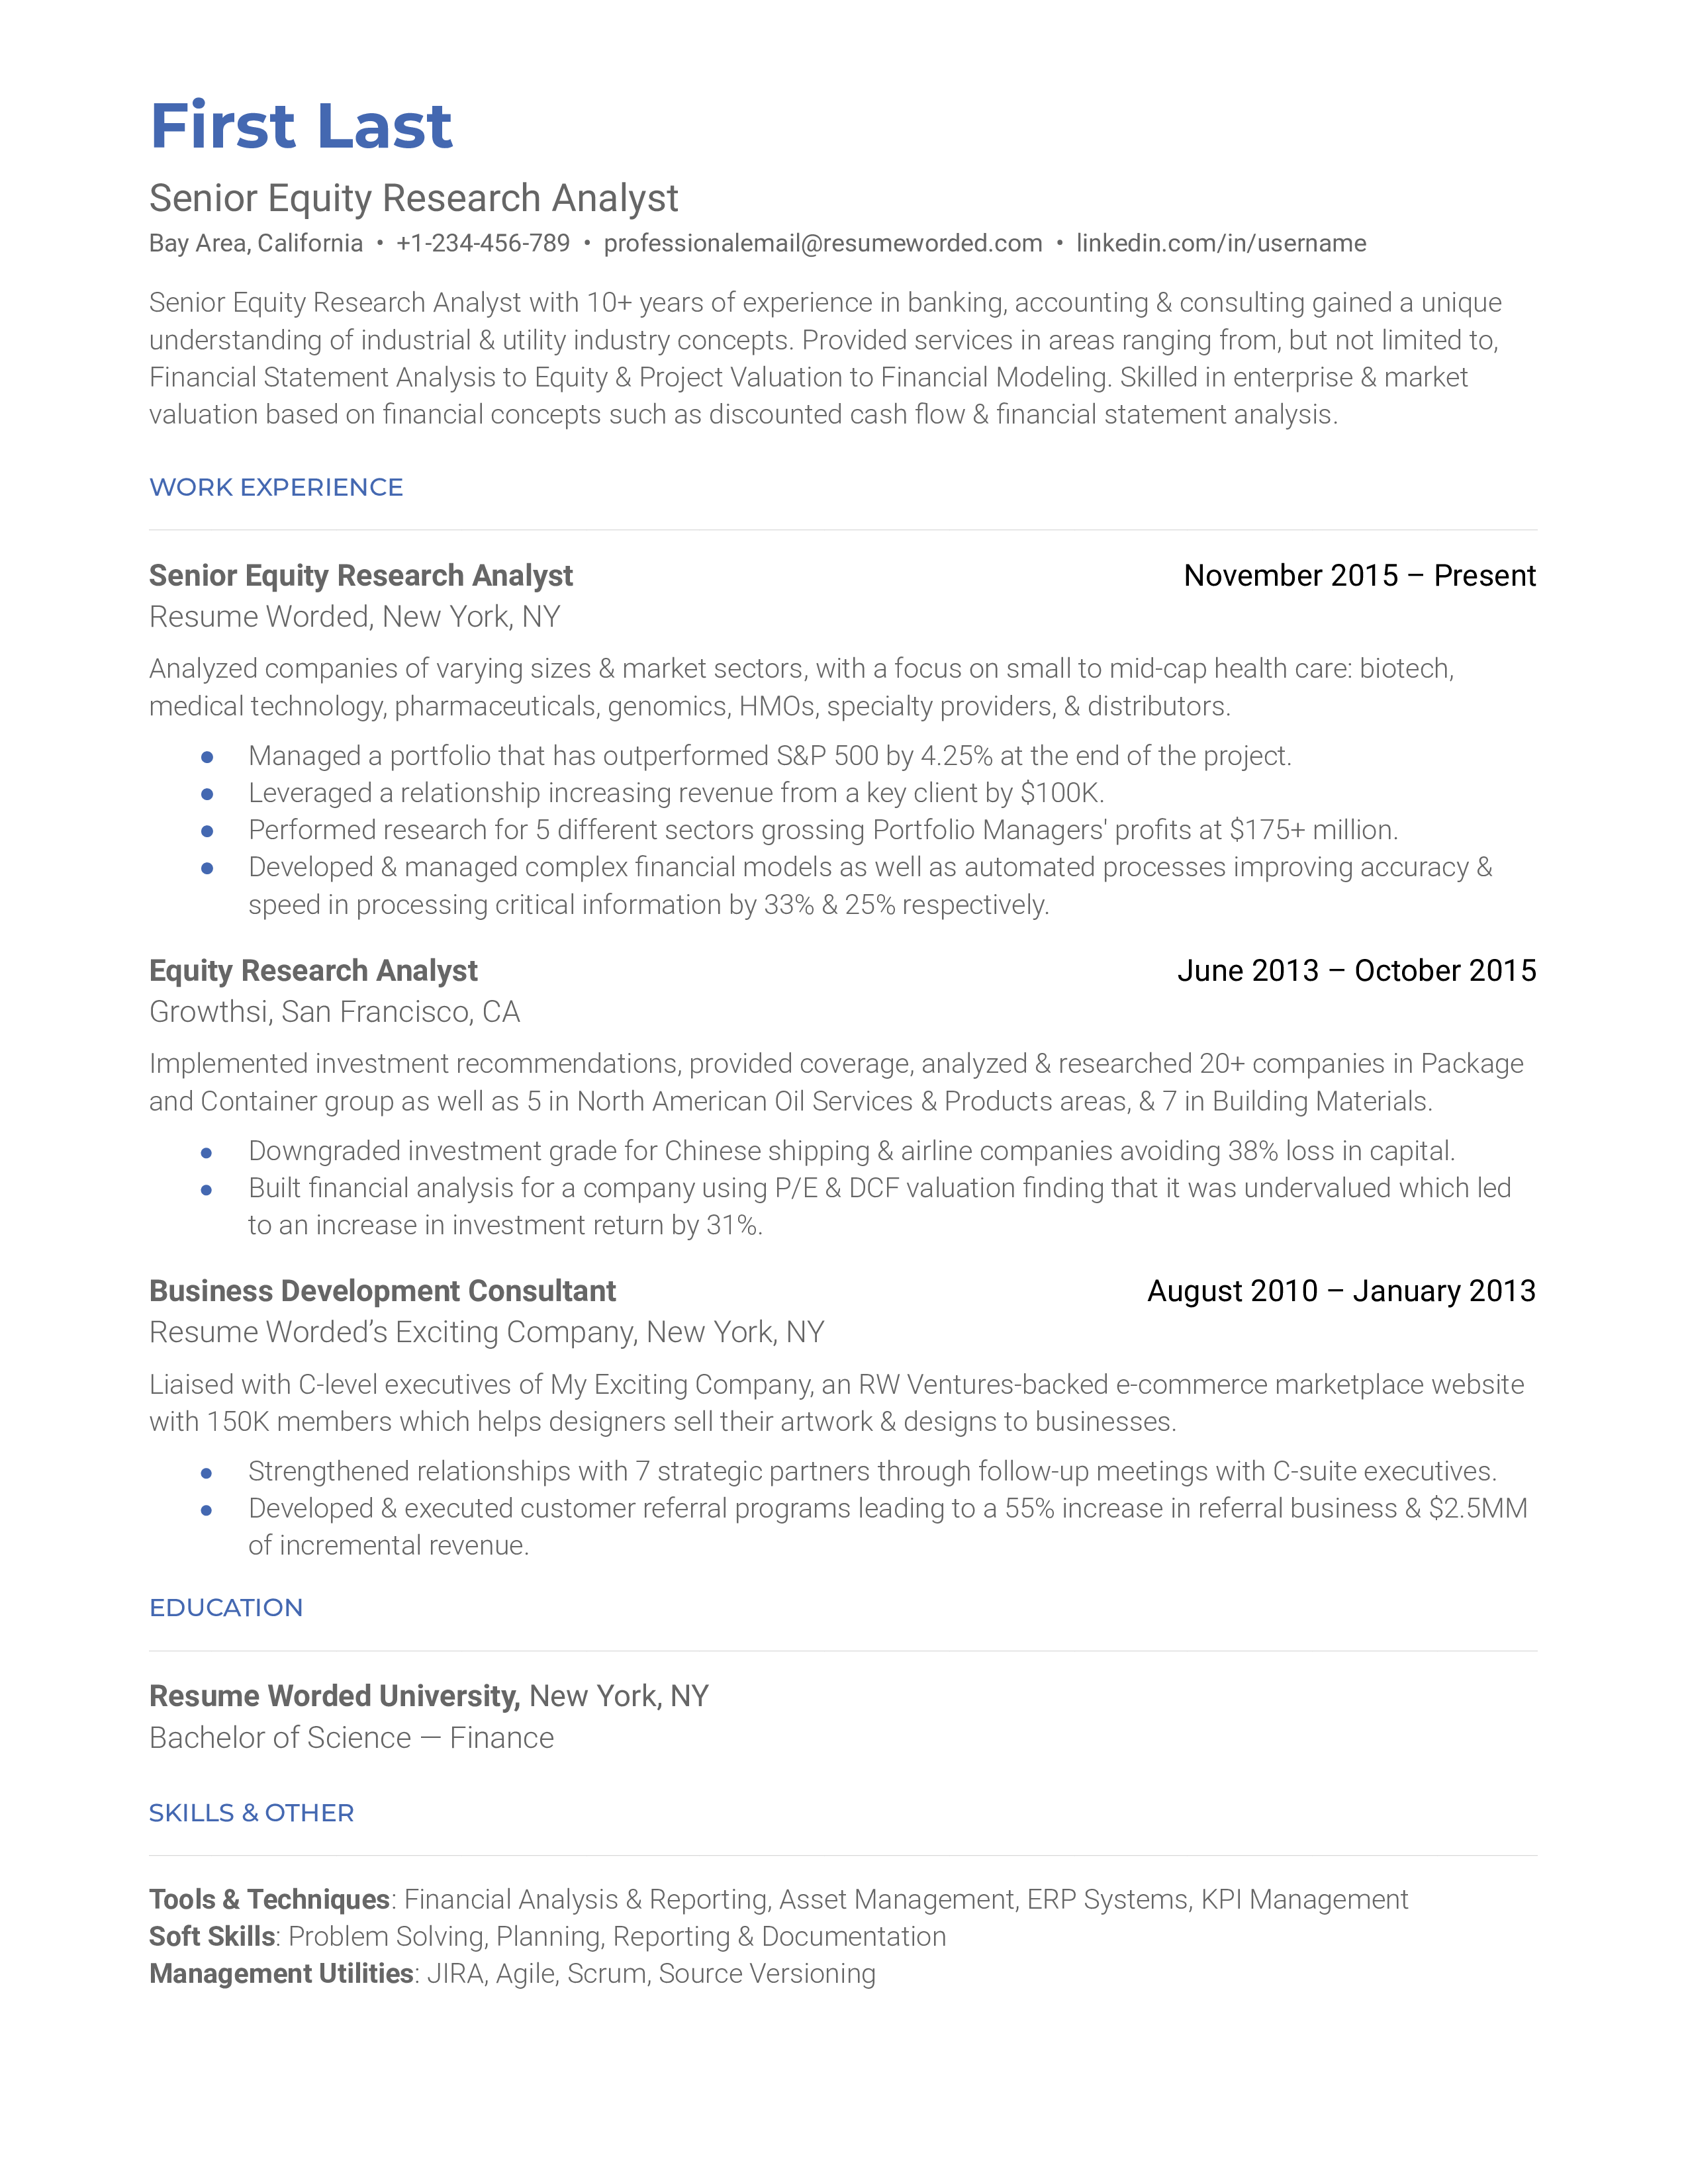 Senior research analyst resume sample that highlights applicant's specialization and career progression.